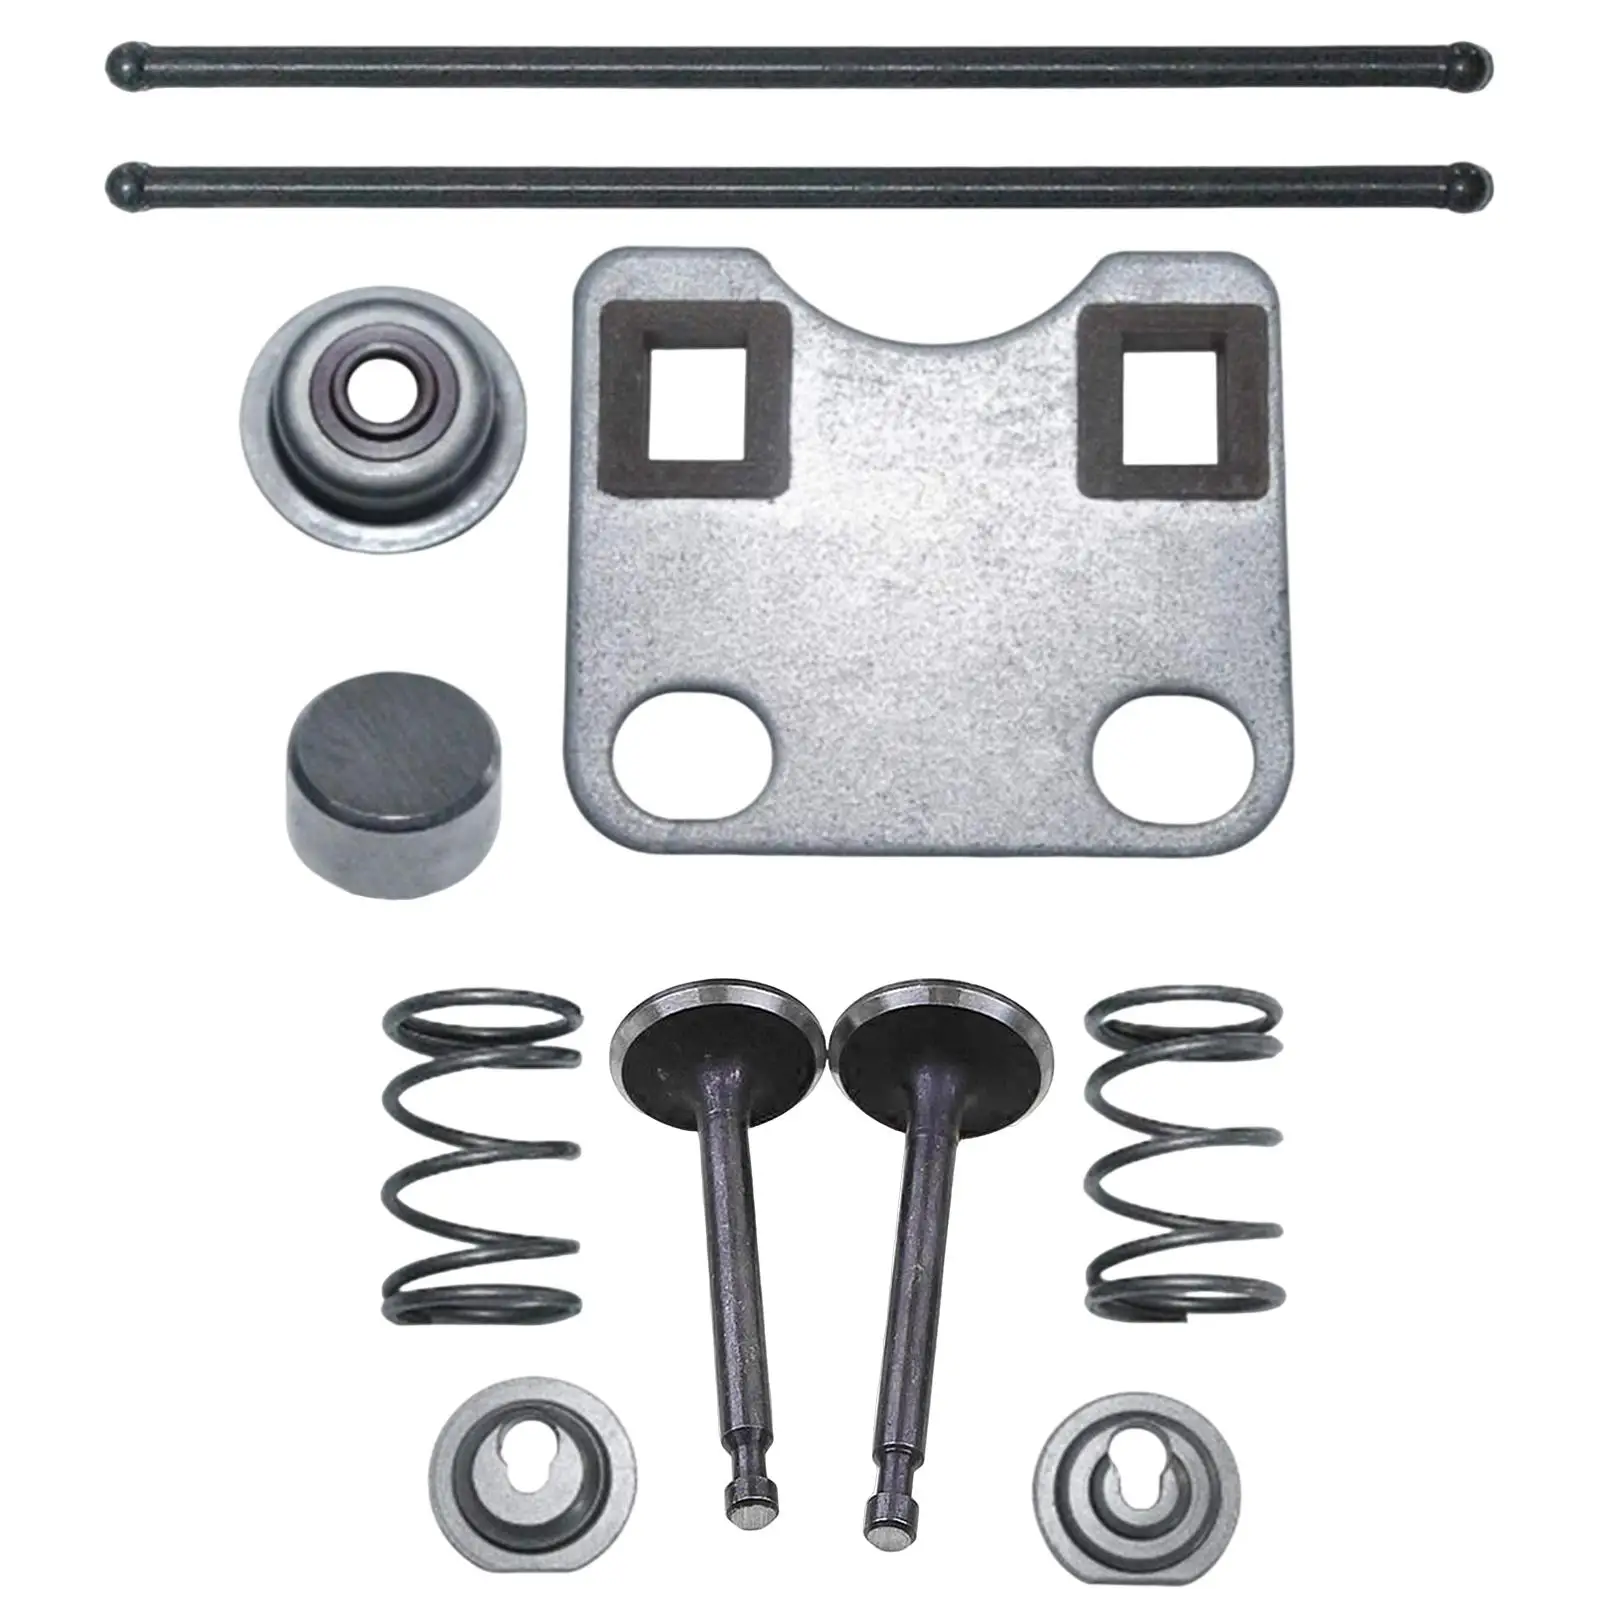 11x Engine Intake Exhaust Valve Kit Parts Guide Plate Parts for Honda Gx160 Gx200